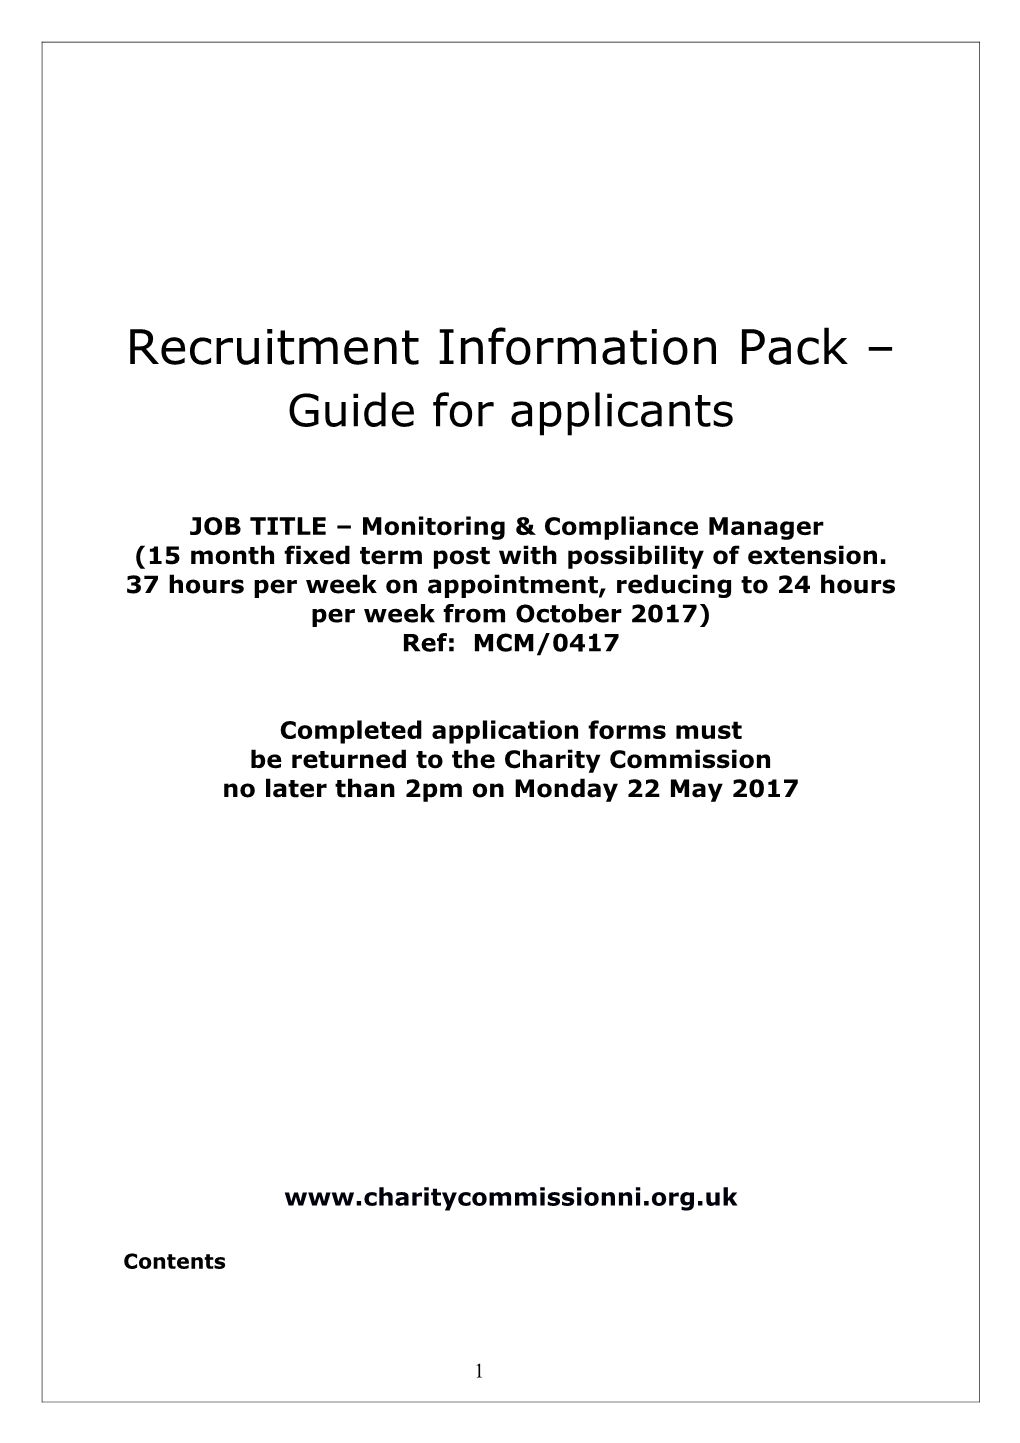 Recruitment Information Pack Guide for Applicants